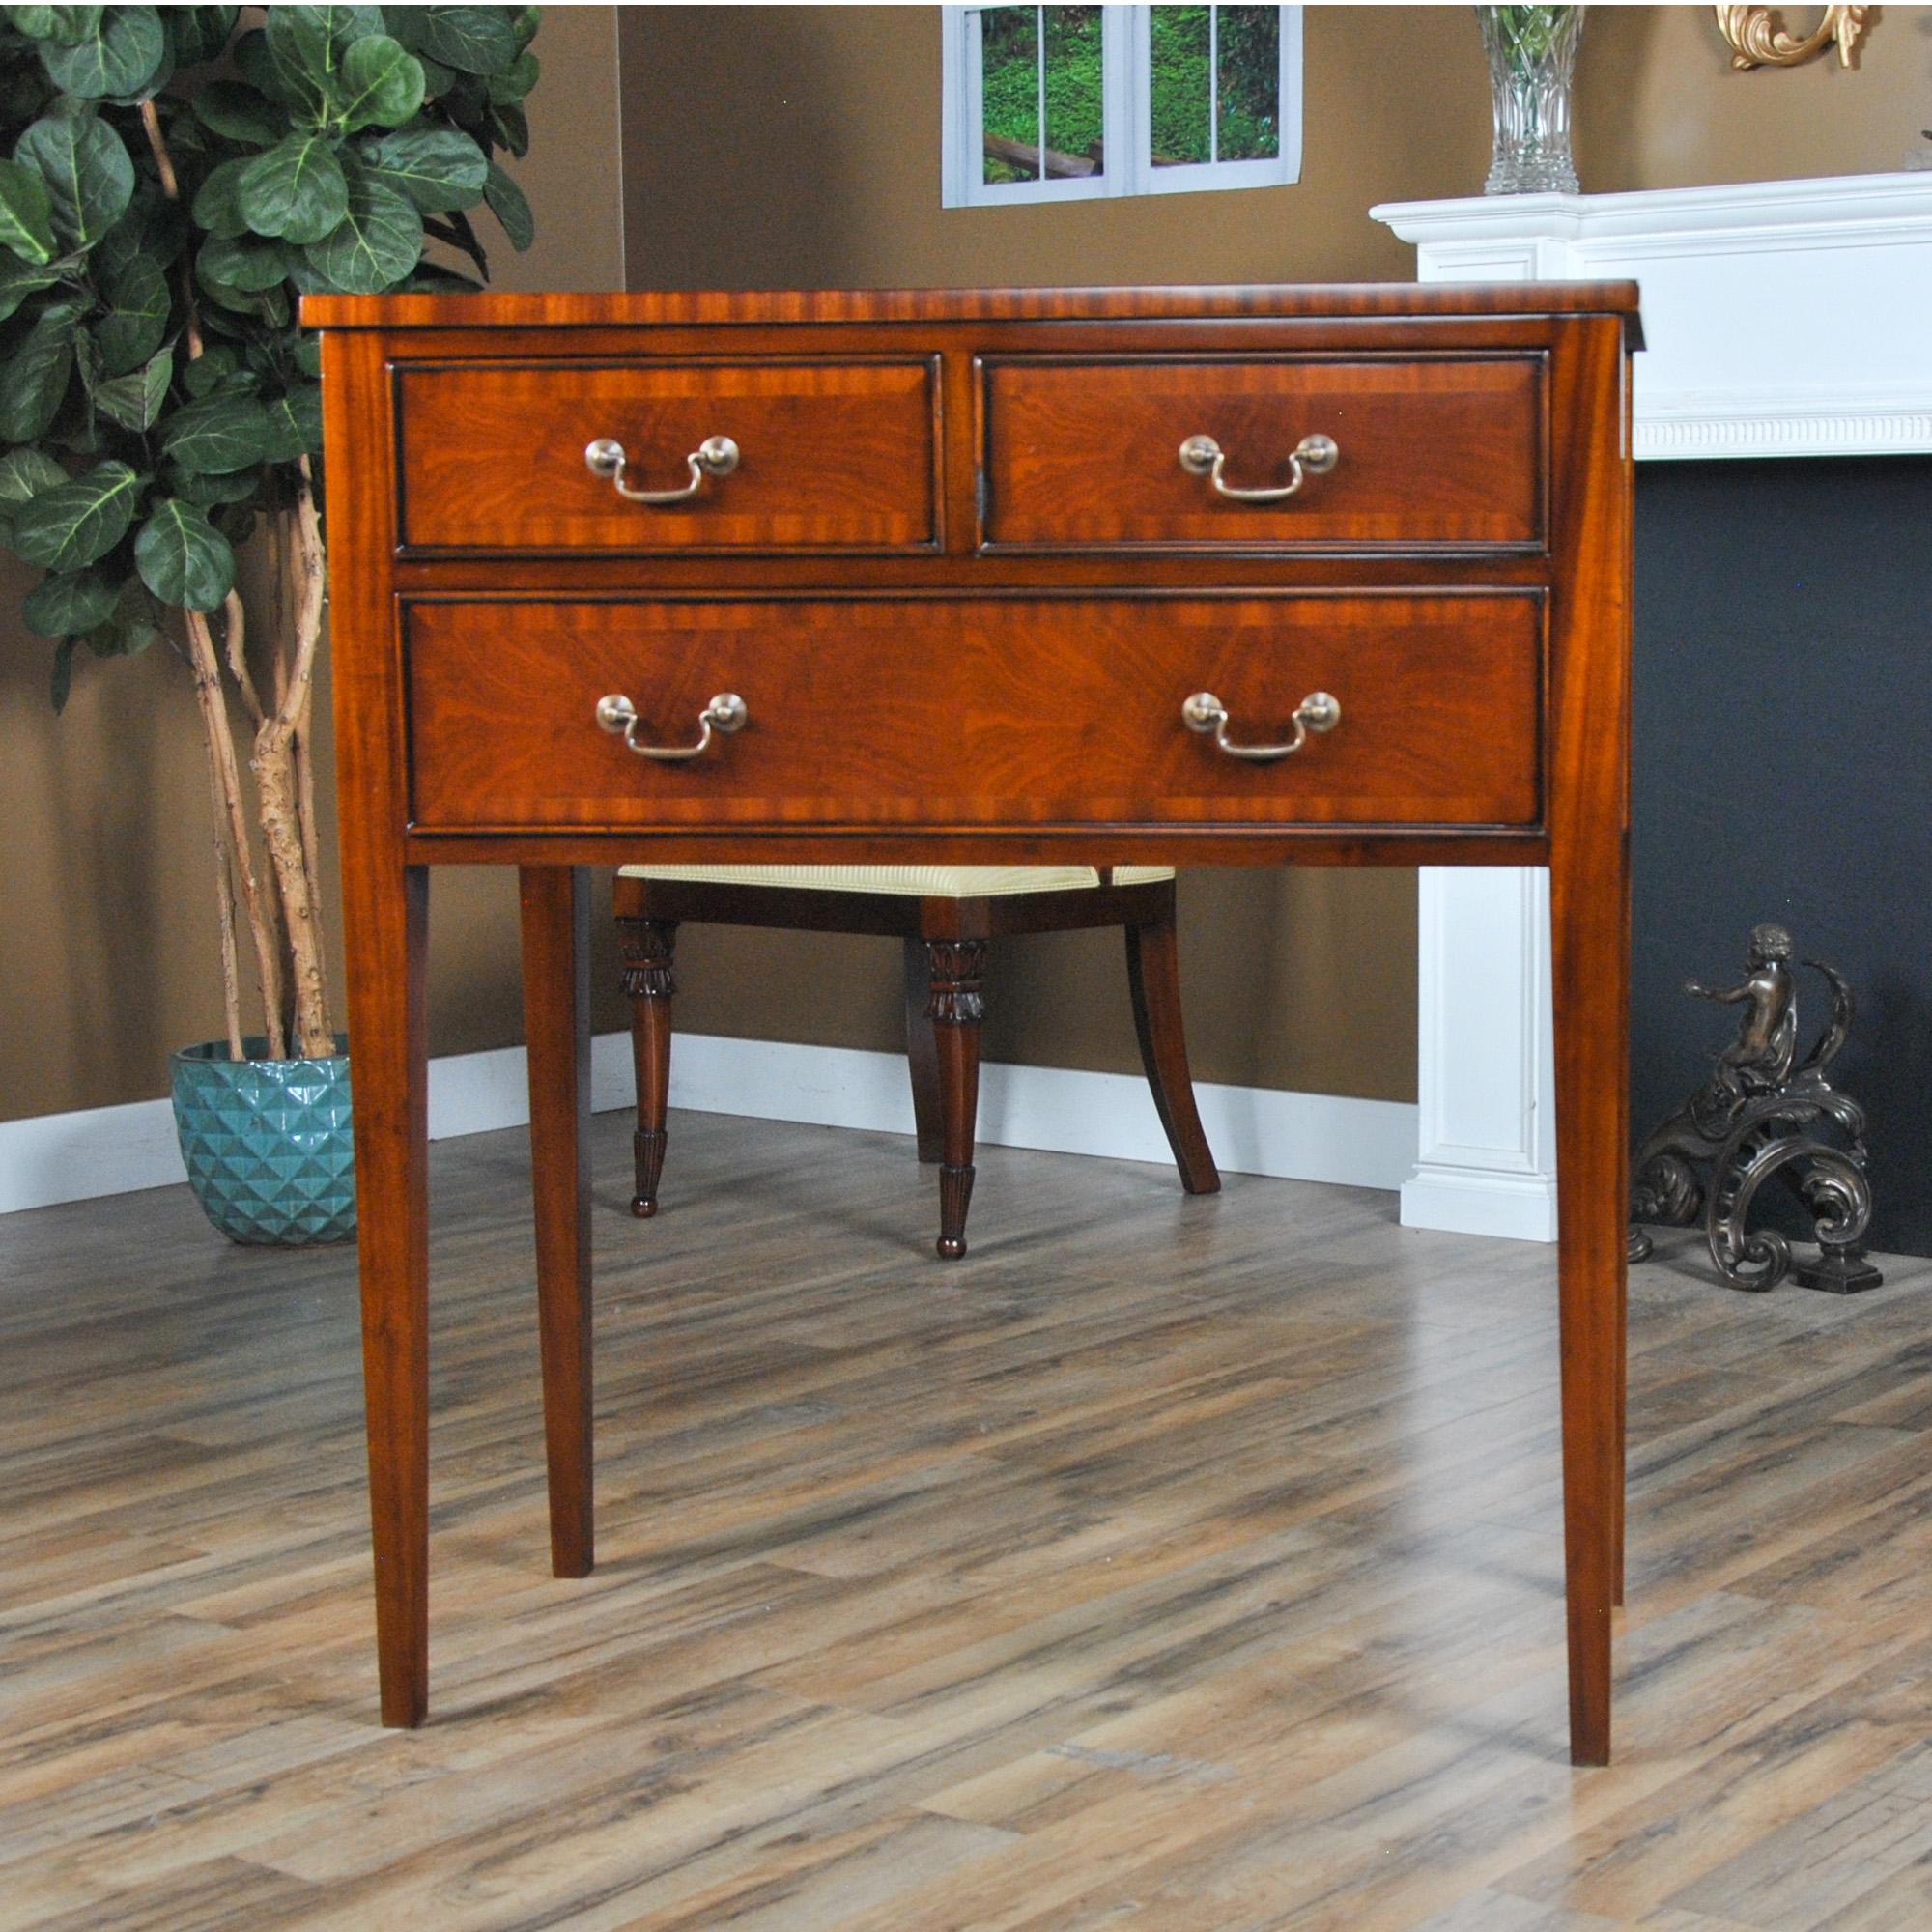 An ideal sideboard for use in smaller spaces in the dining room this version of the Small Federal Mahogany Sideboard is also designed to work with almost any decor. Ideal in a dining room the piece is also suited for use in a living room or hallway.